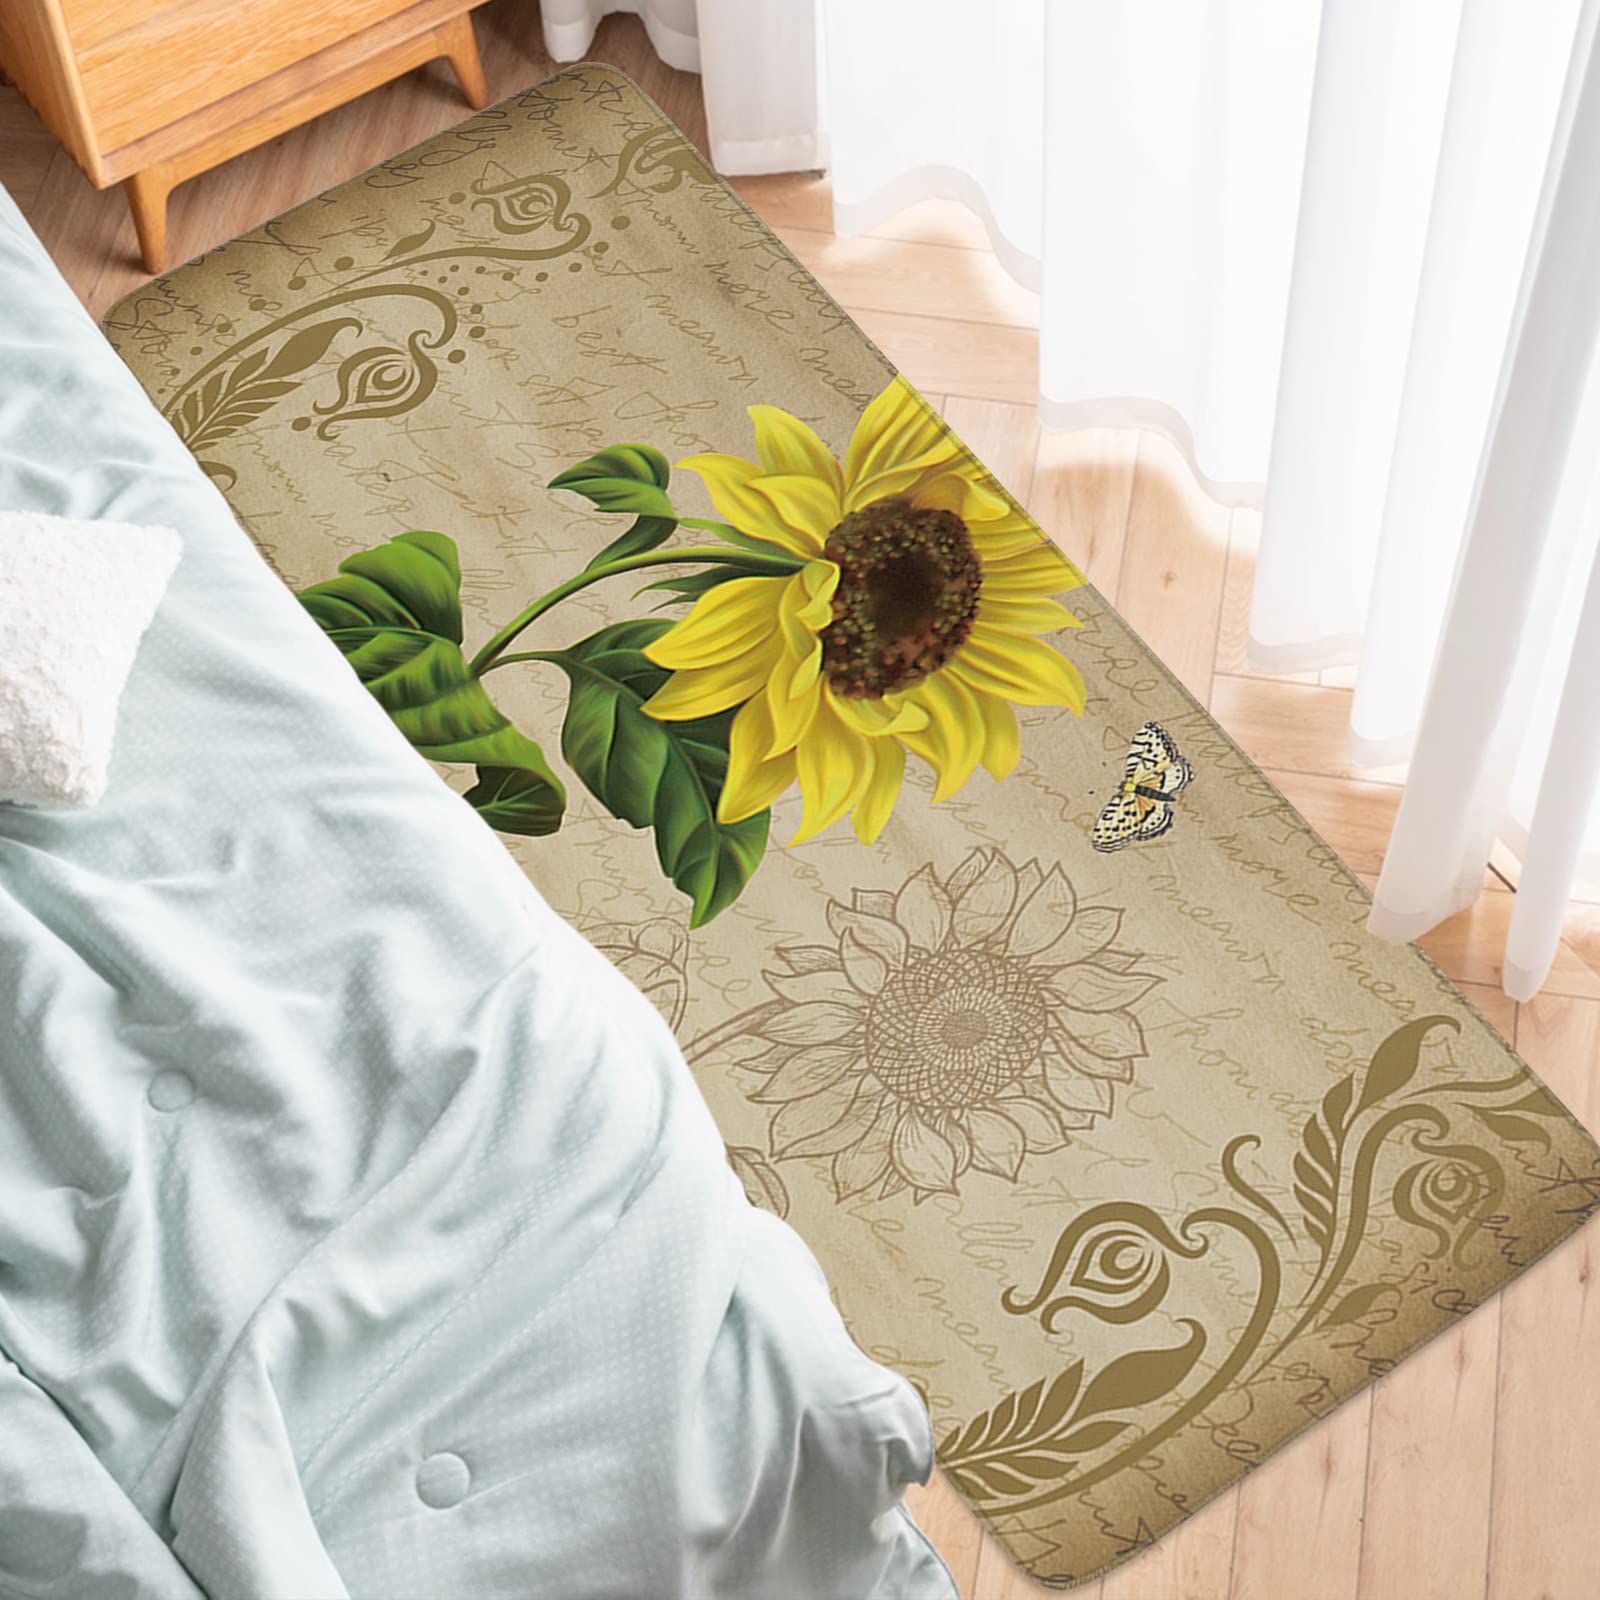 LooPoP Kitchen Rugs and Mats Non Skid Washable Sets Sunflower Anti Fatigue 2 Piece Set Non Skid Waterproof Standing Rugs Spring Flowers Farmhouse